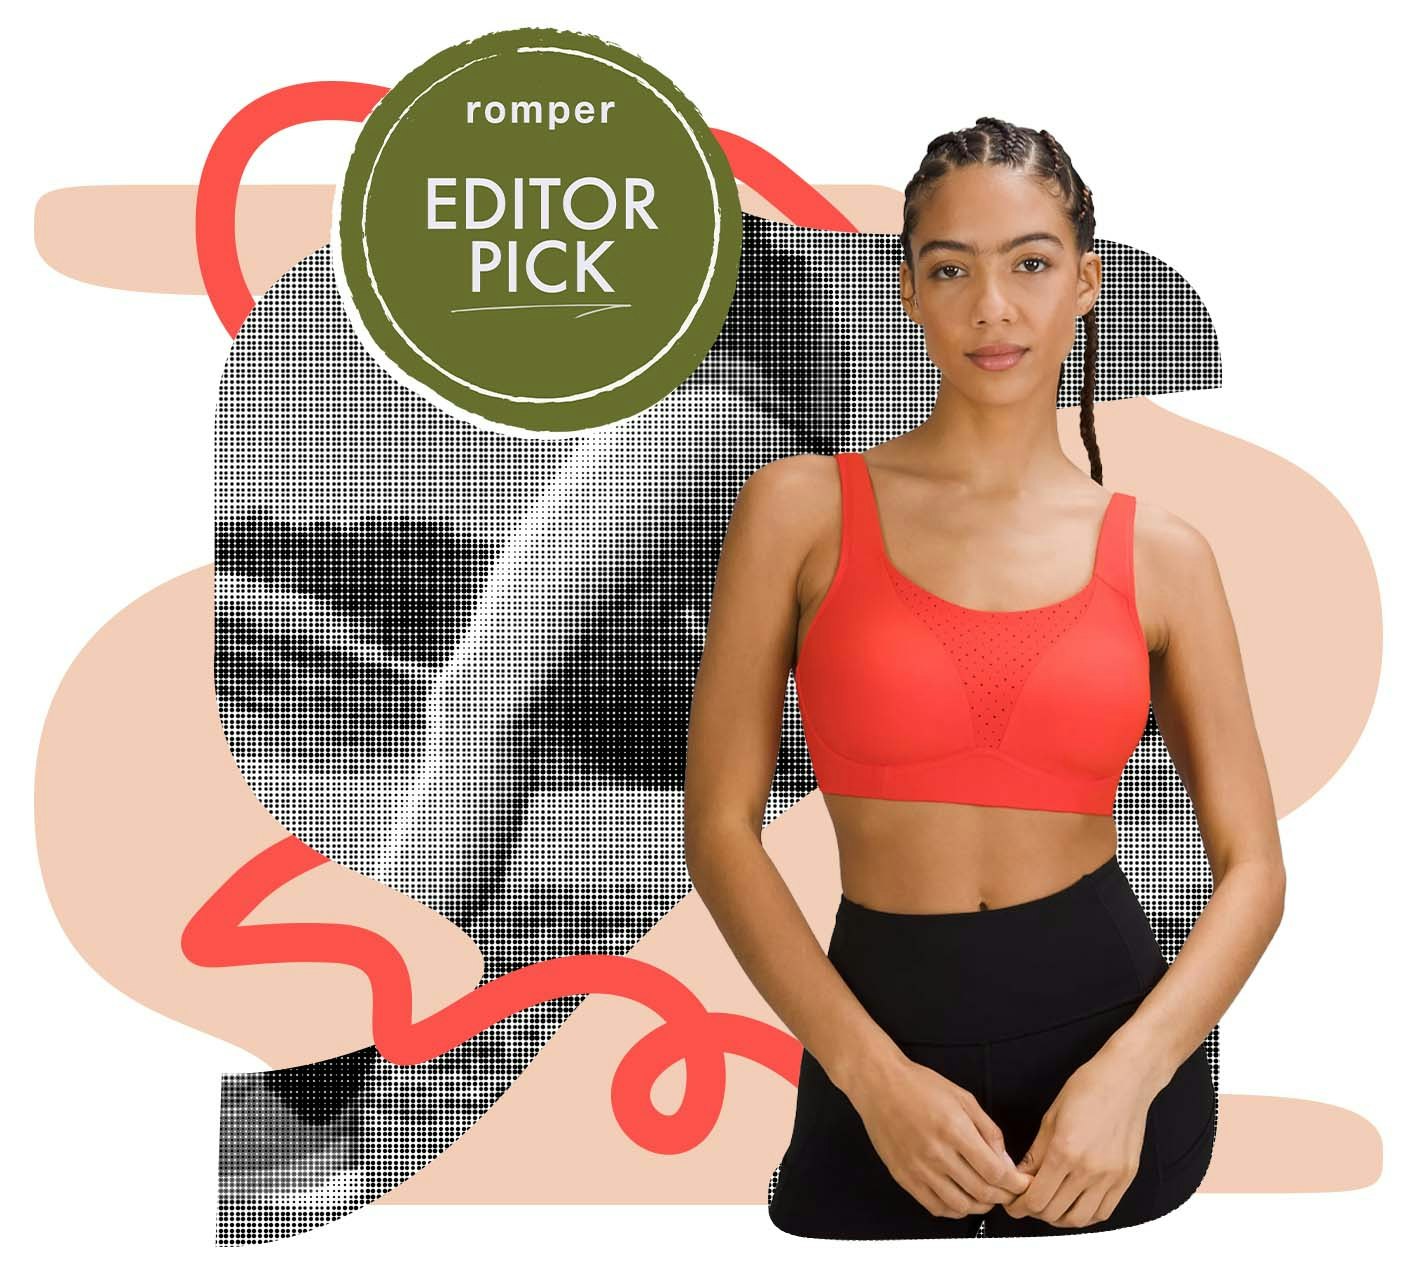 Lululemon Sports Bra Reviews  International Society of Precision  Agriculture